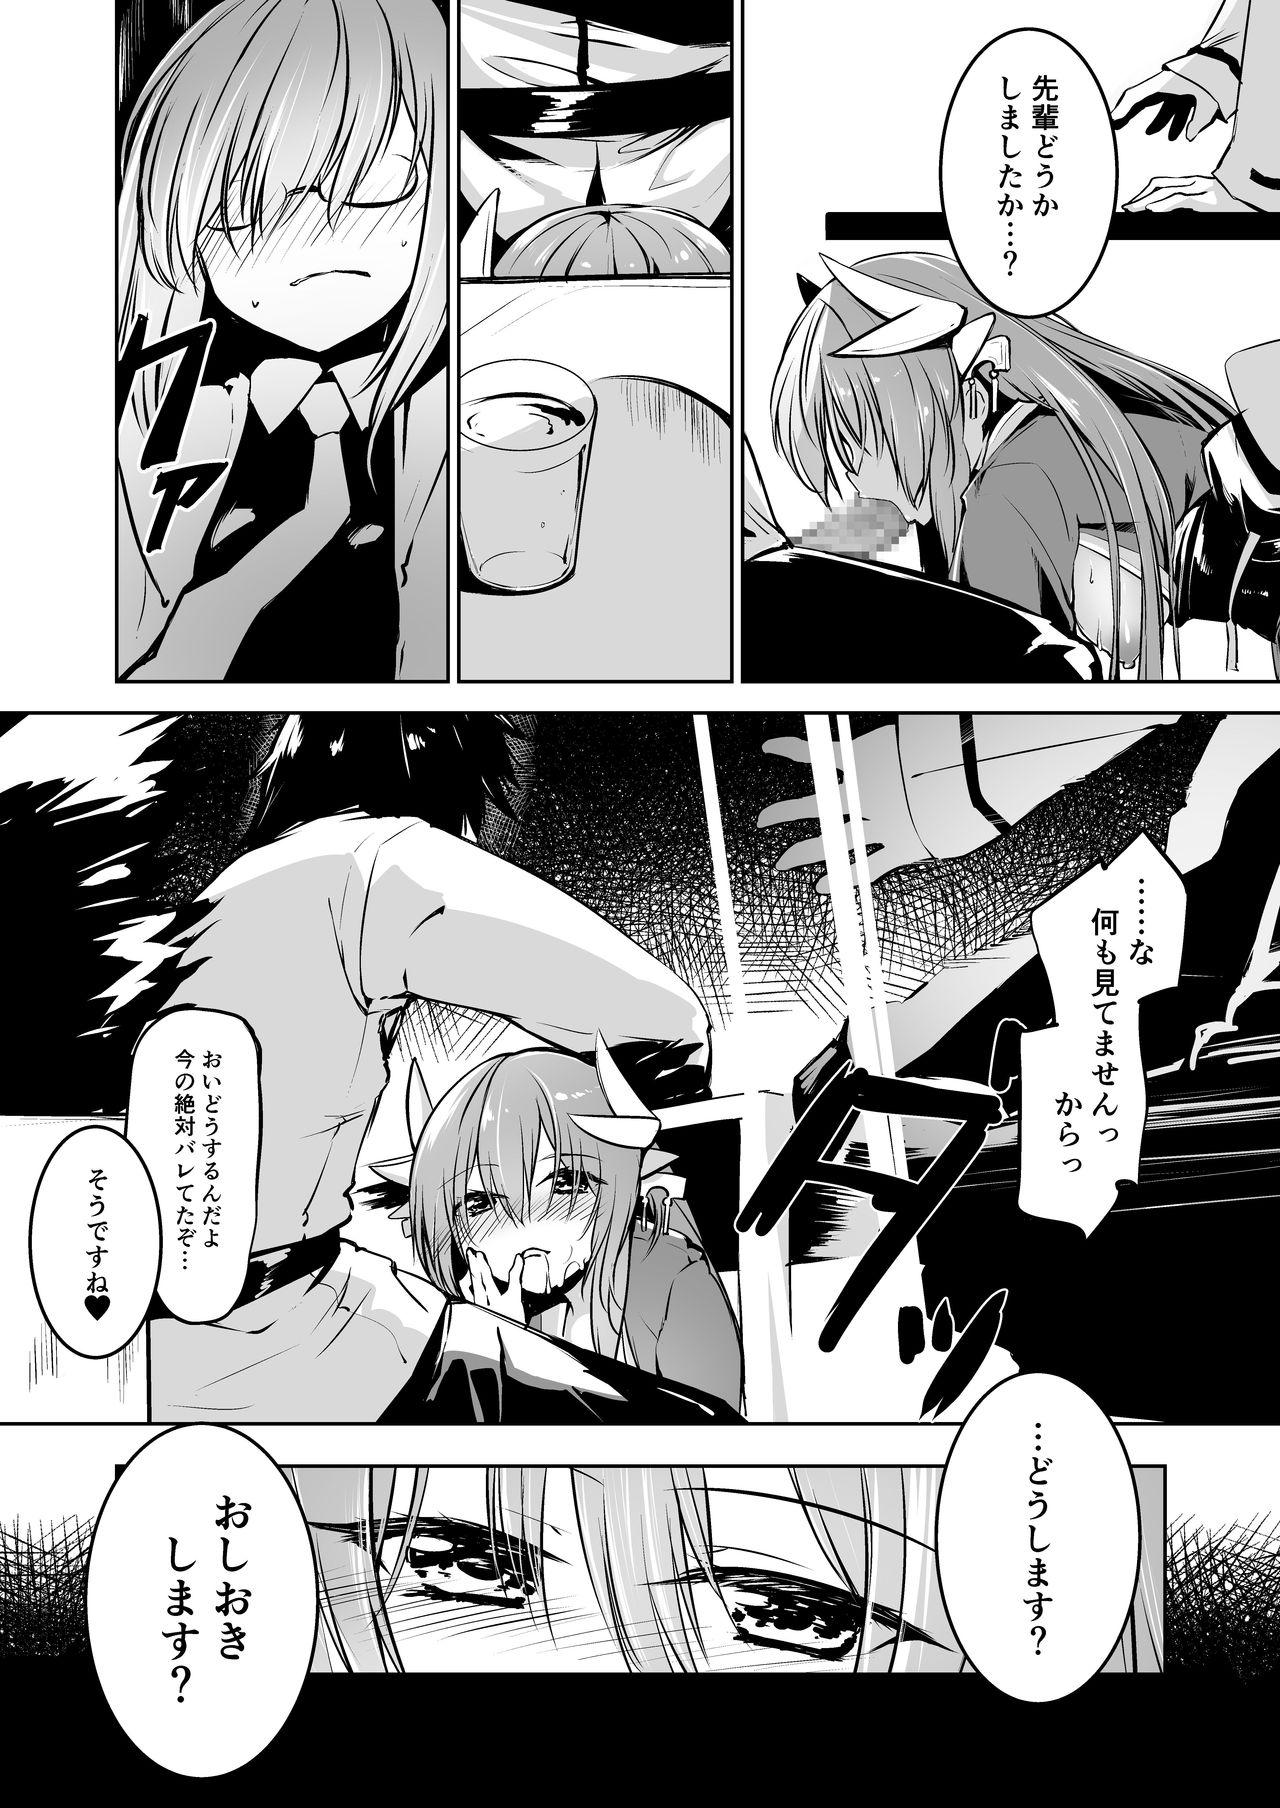 Transsexual Kiyohime Lovers vol. 02 - Fate grand order Show - Page 11